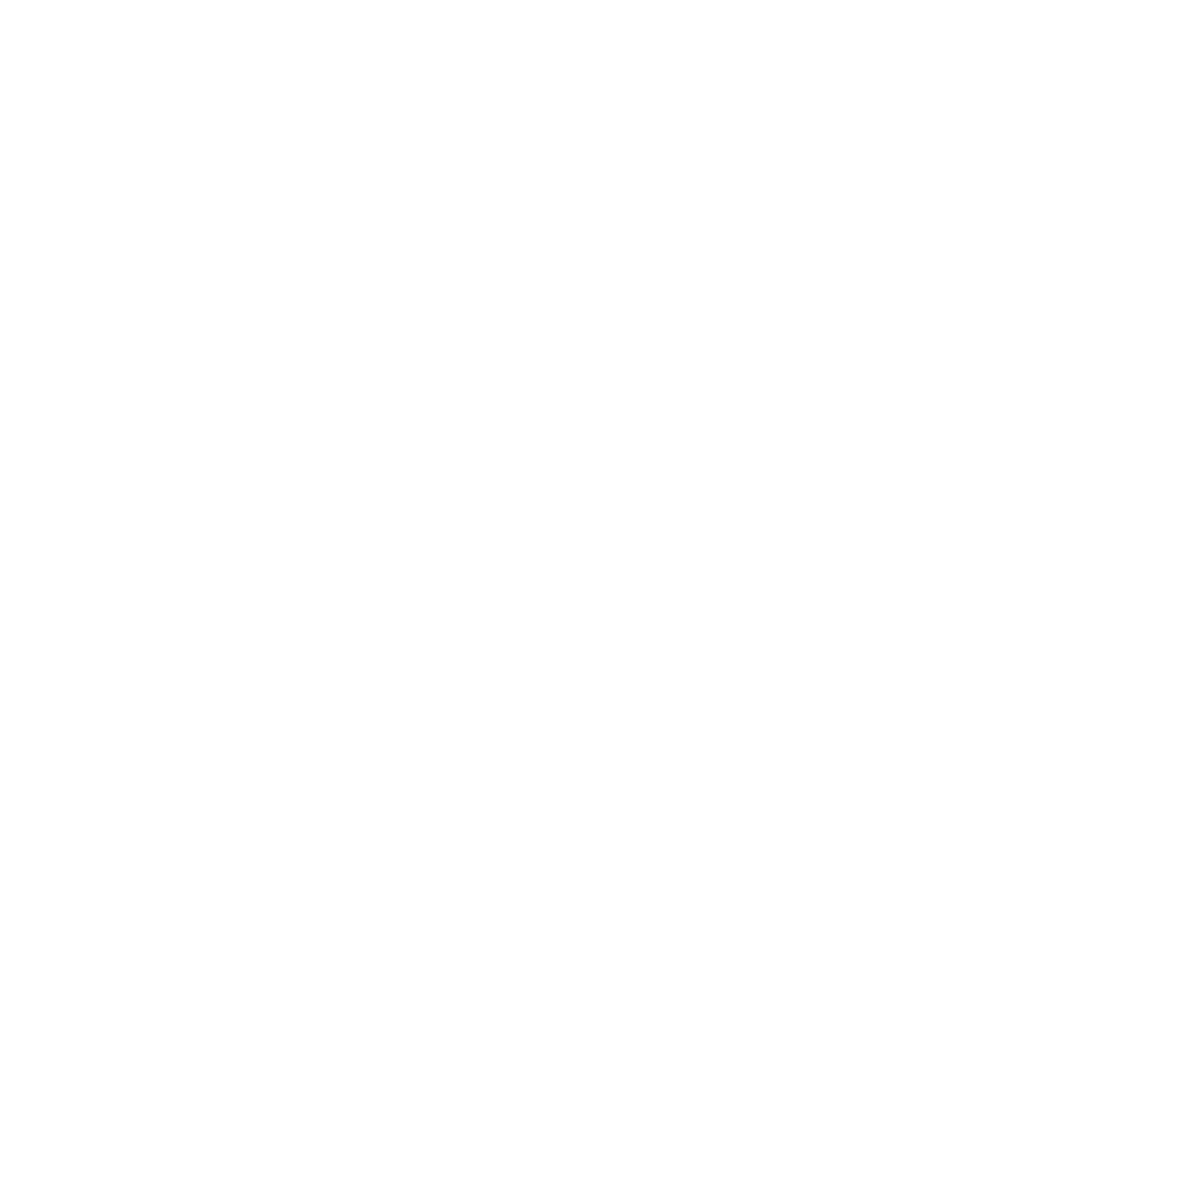 Trash Collected icon